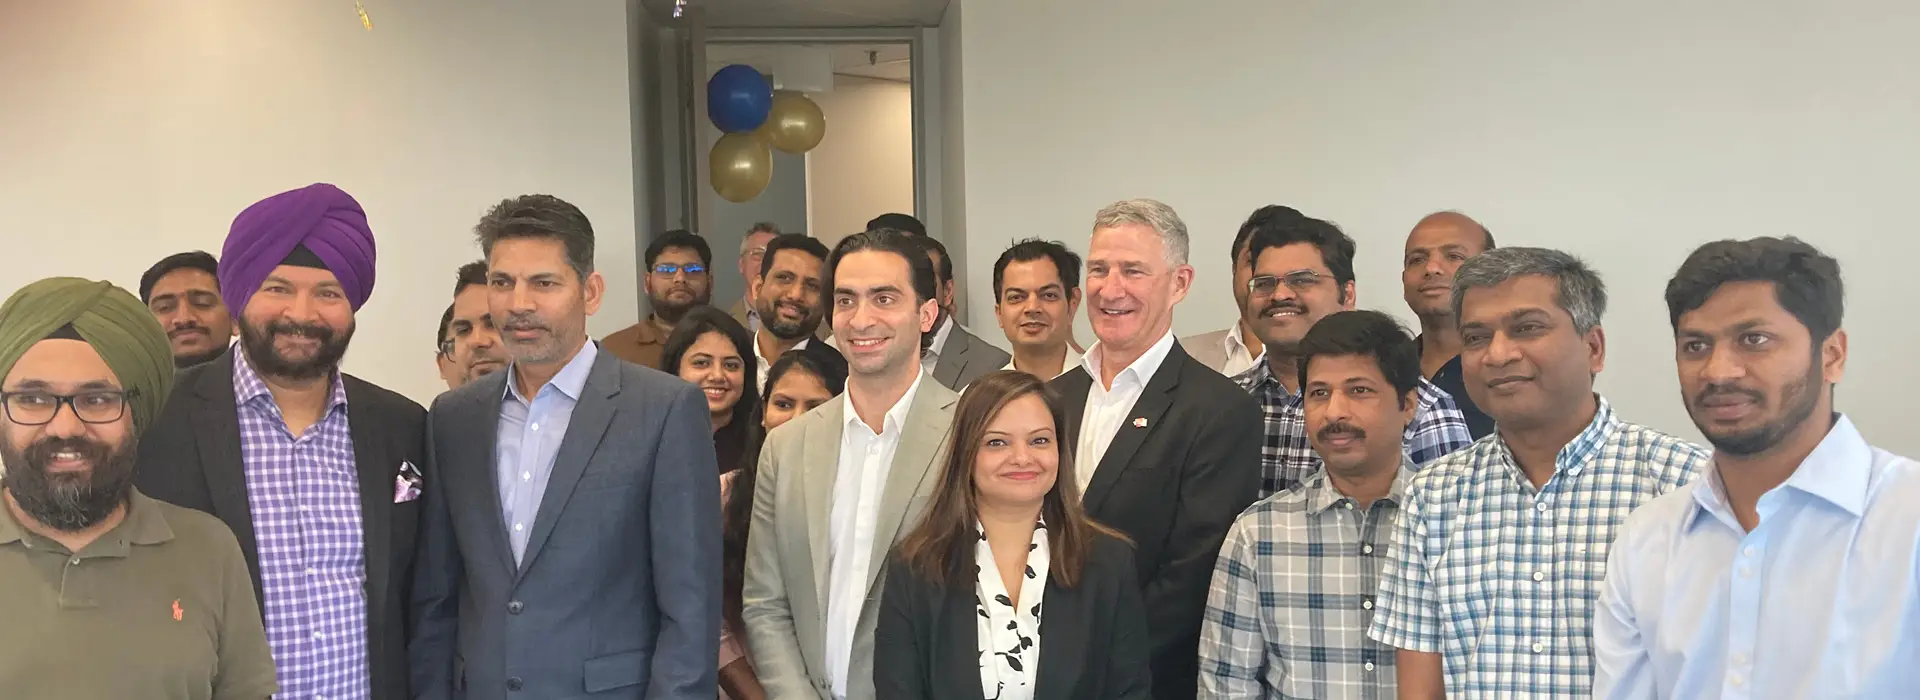 Jade expands Services to Mississauga Businesses with the Opening of its New Ontario Canada Office